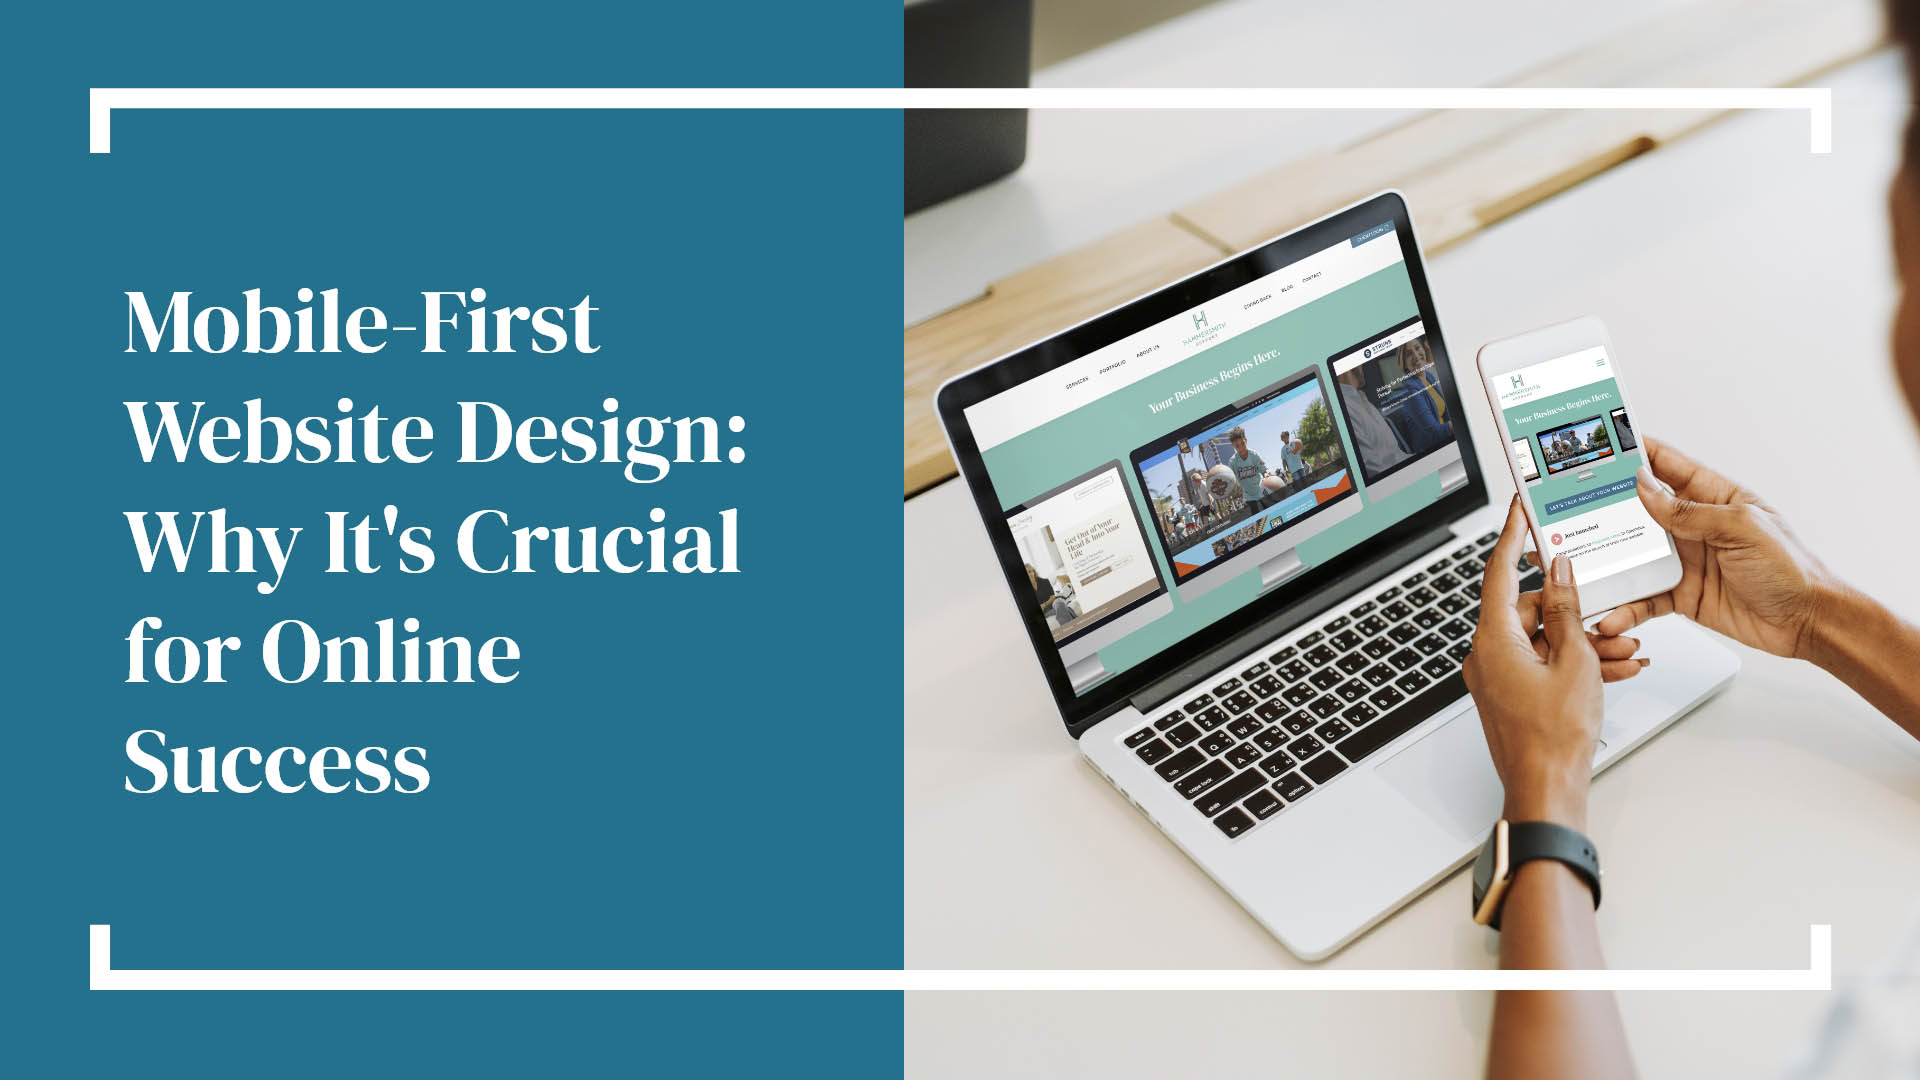 Mobile-First Website Design: Why It's Crucial for Online Success